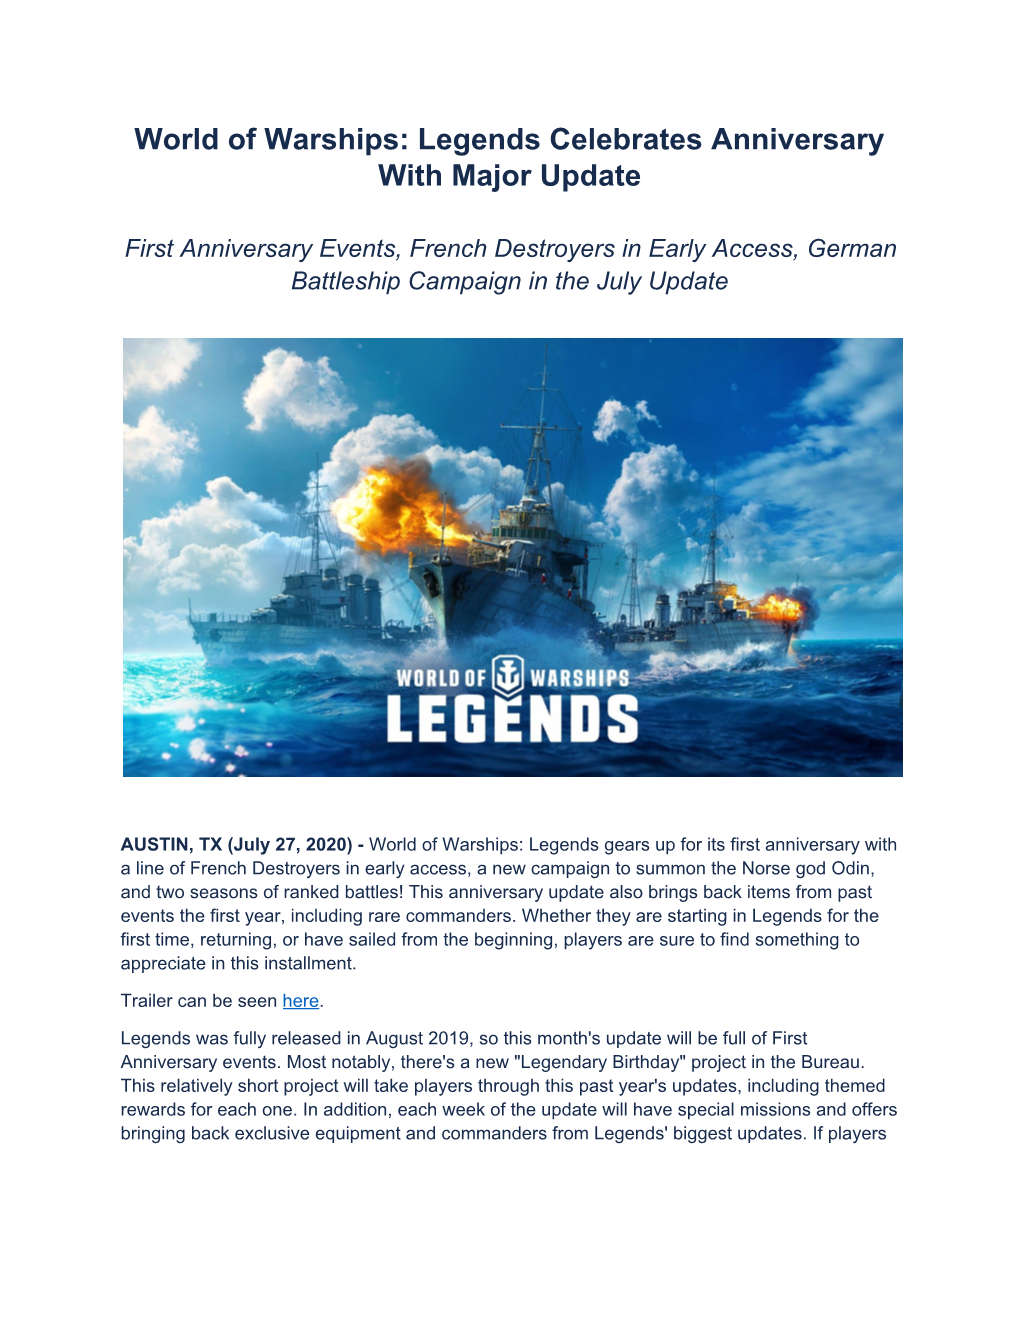 World of Warships: Legends Celebrates Anniversary with Major Update